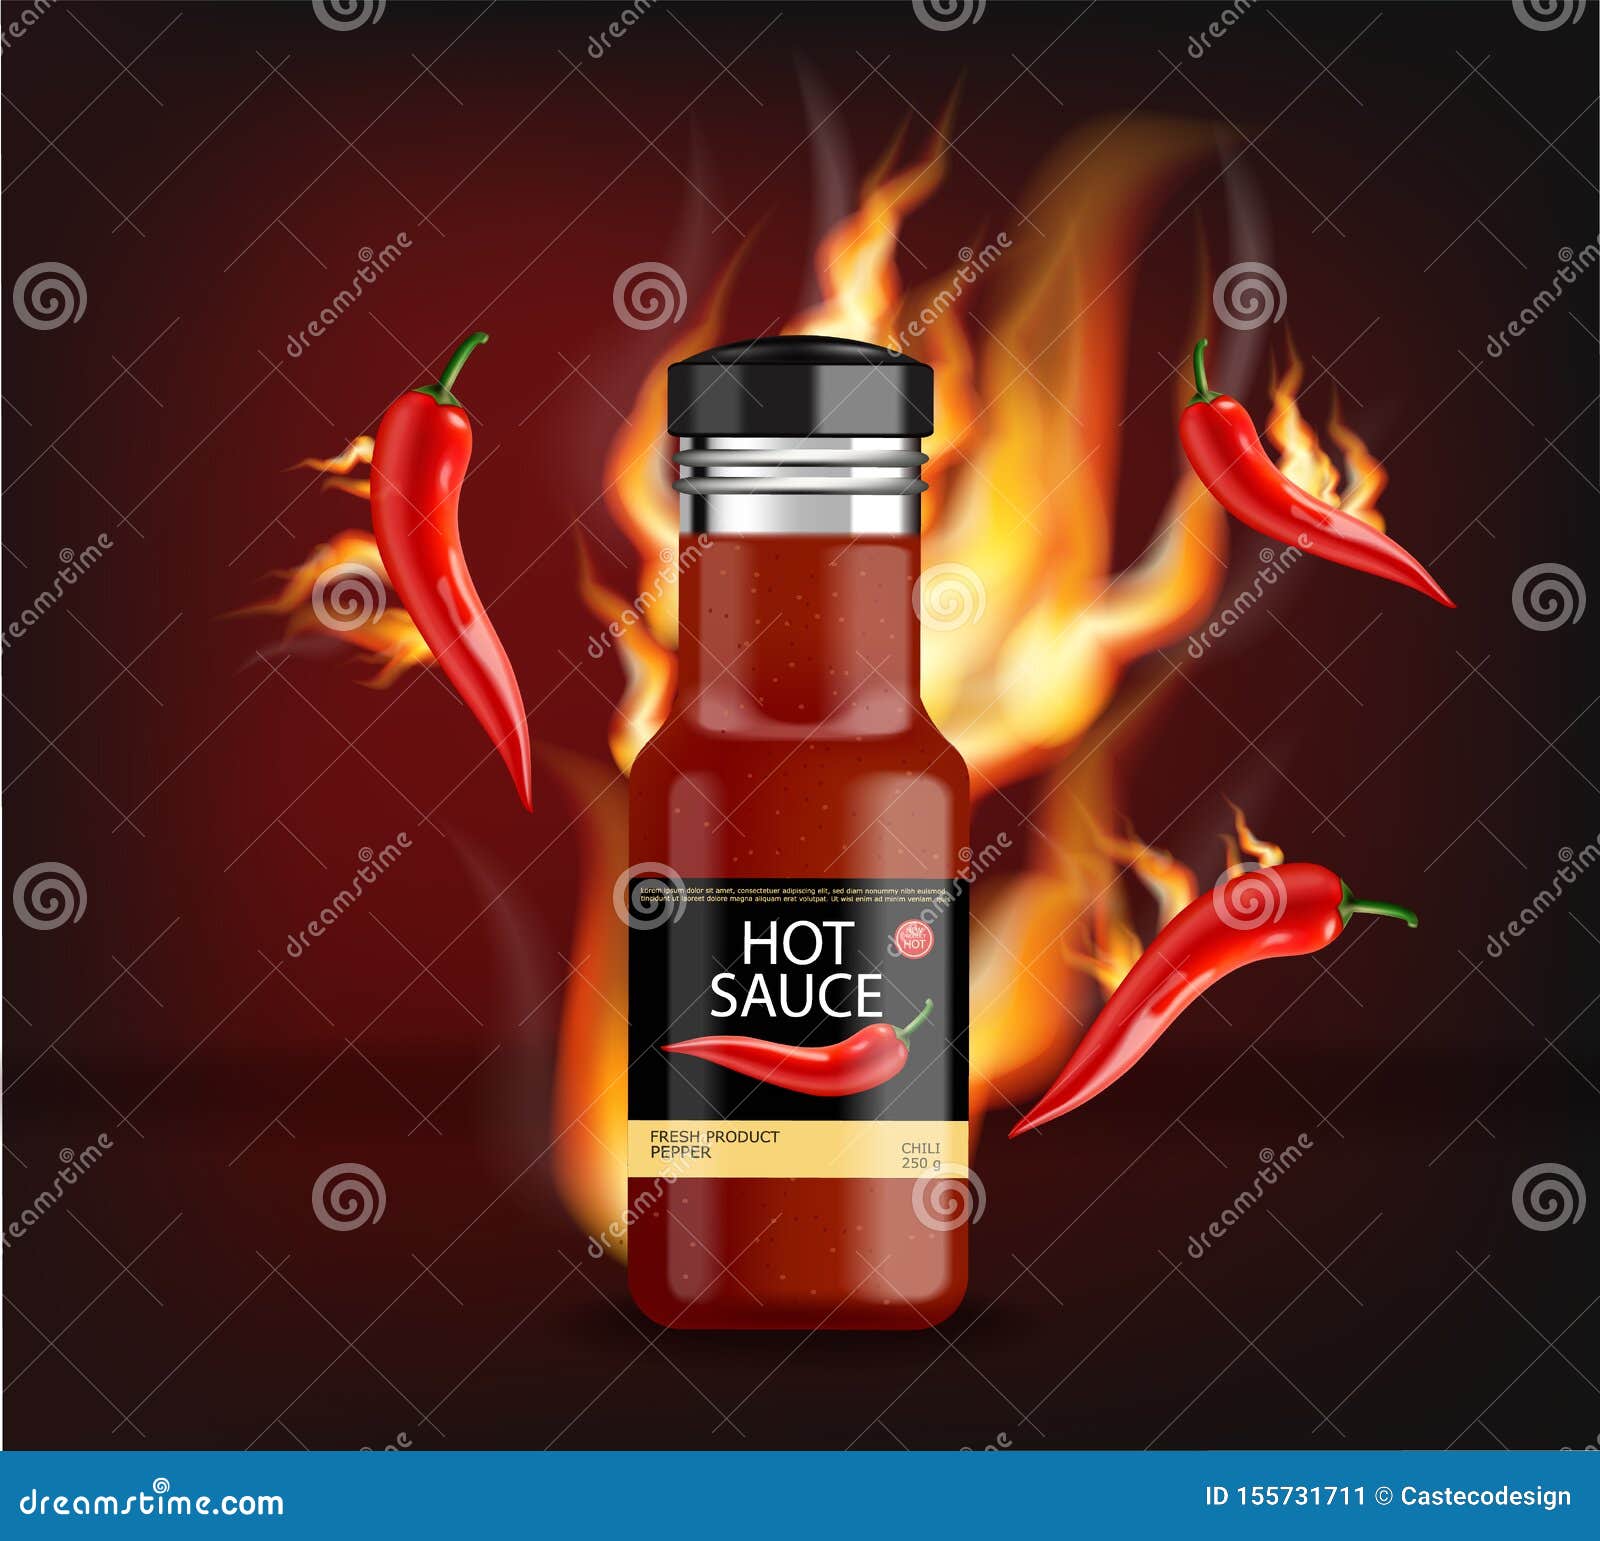 Download Hot Chili Sauce On Fire Vector Realistic. Product Placement Mock Up Bottle. Label Design ...